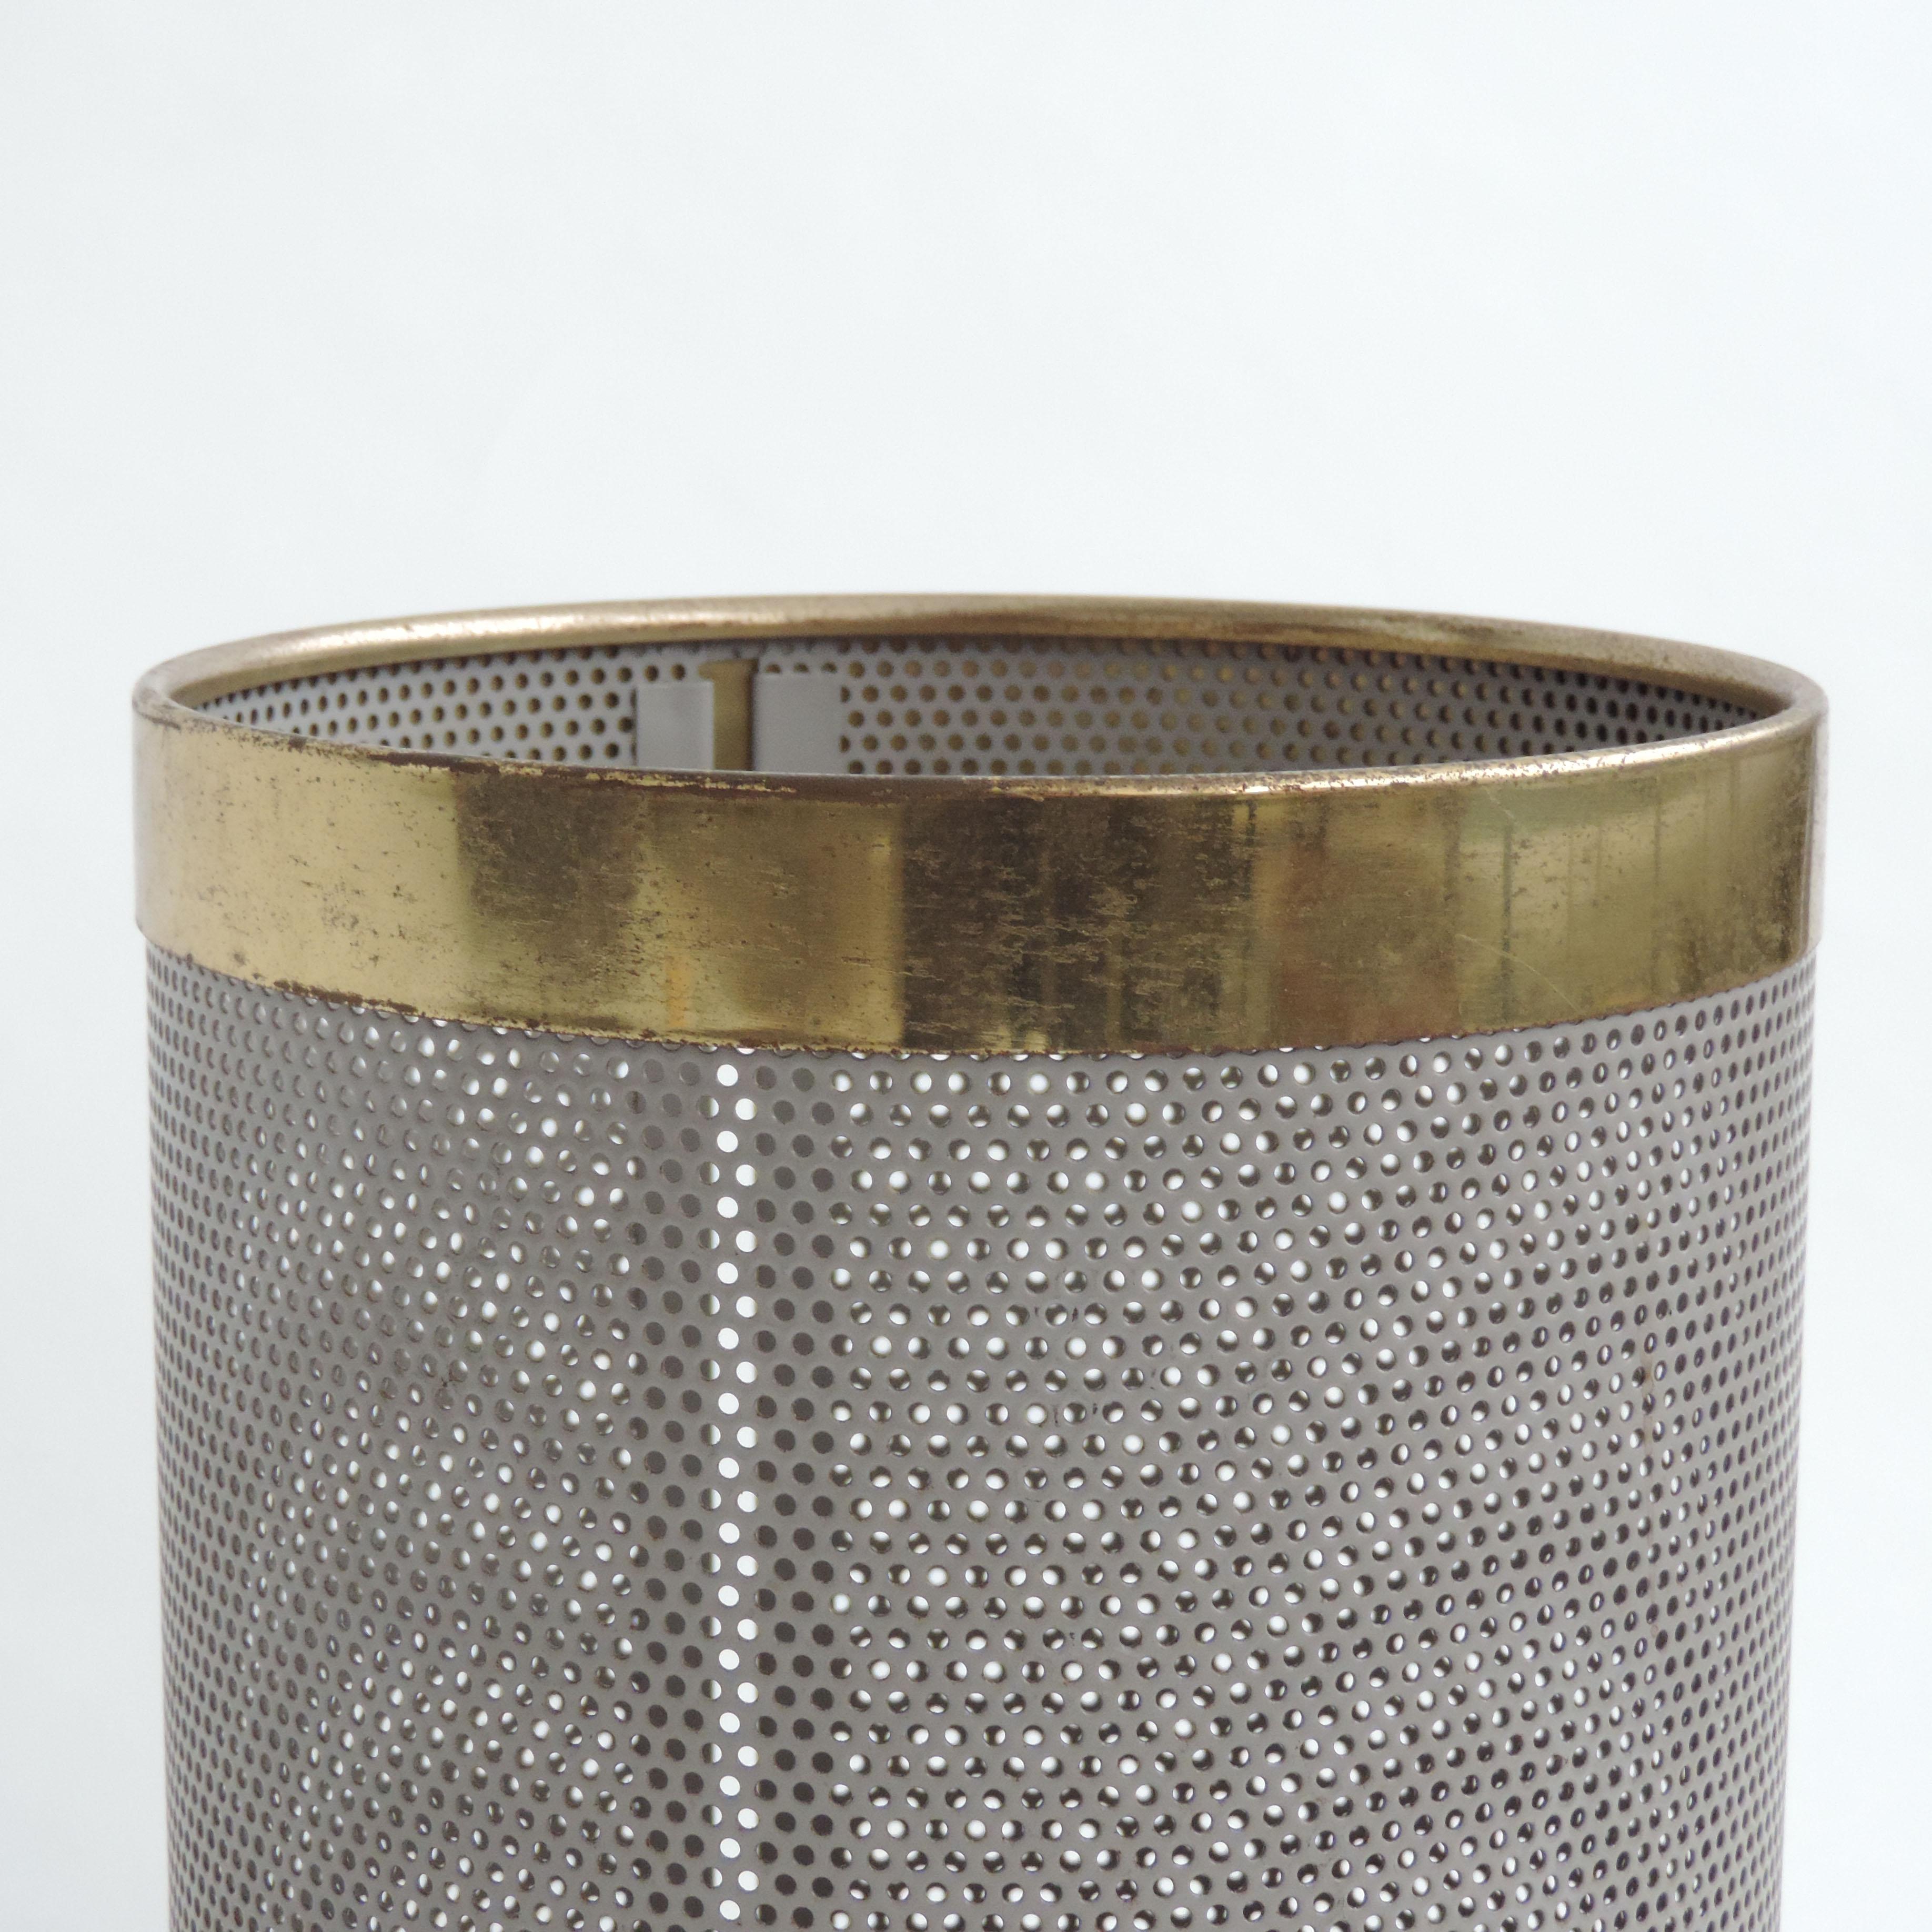 Modernist perforated Italian Wastepaper bin in grey metal and brass
Italy 1960s.